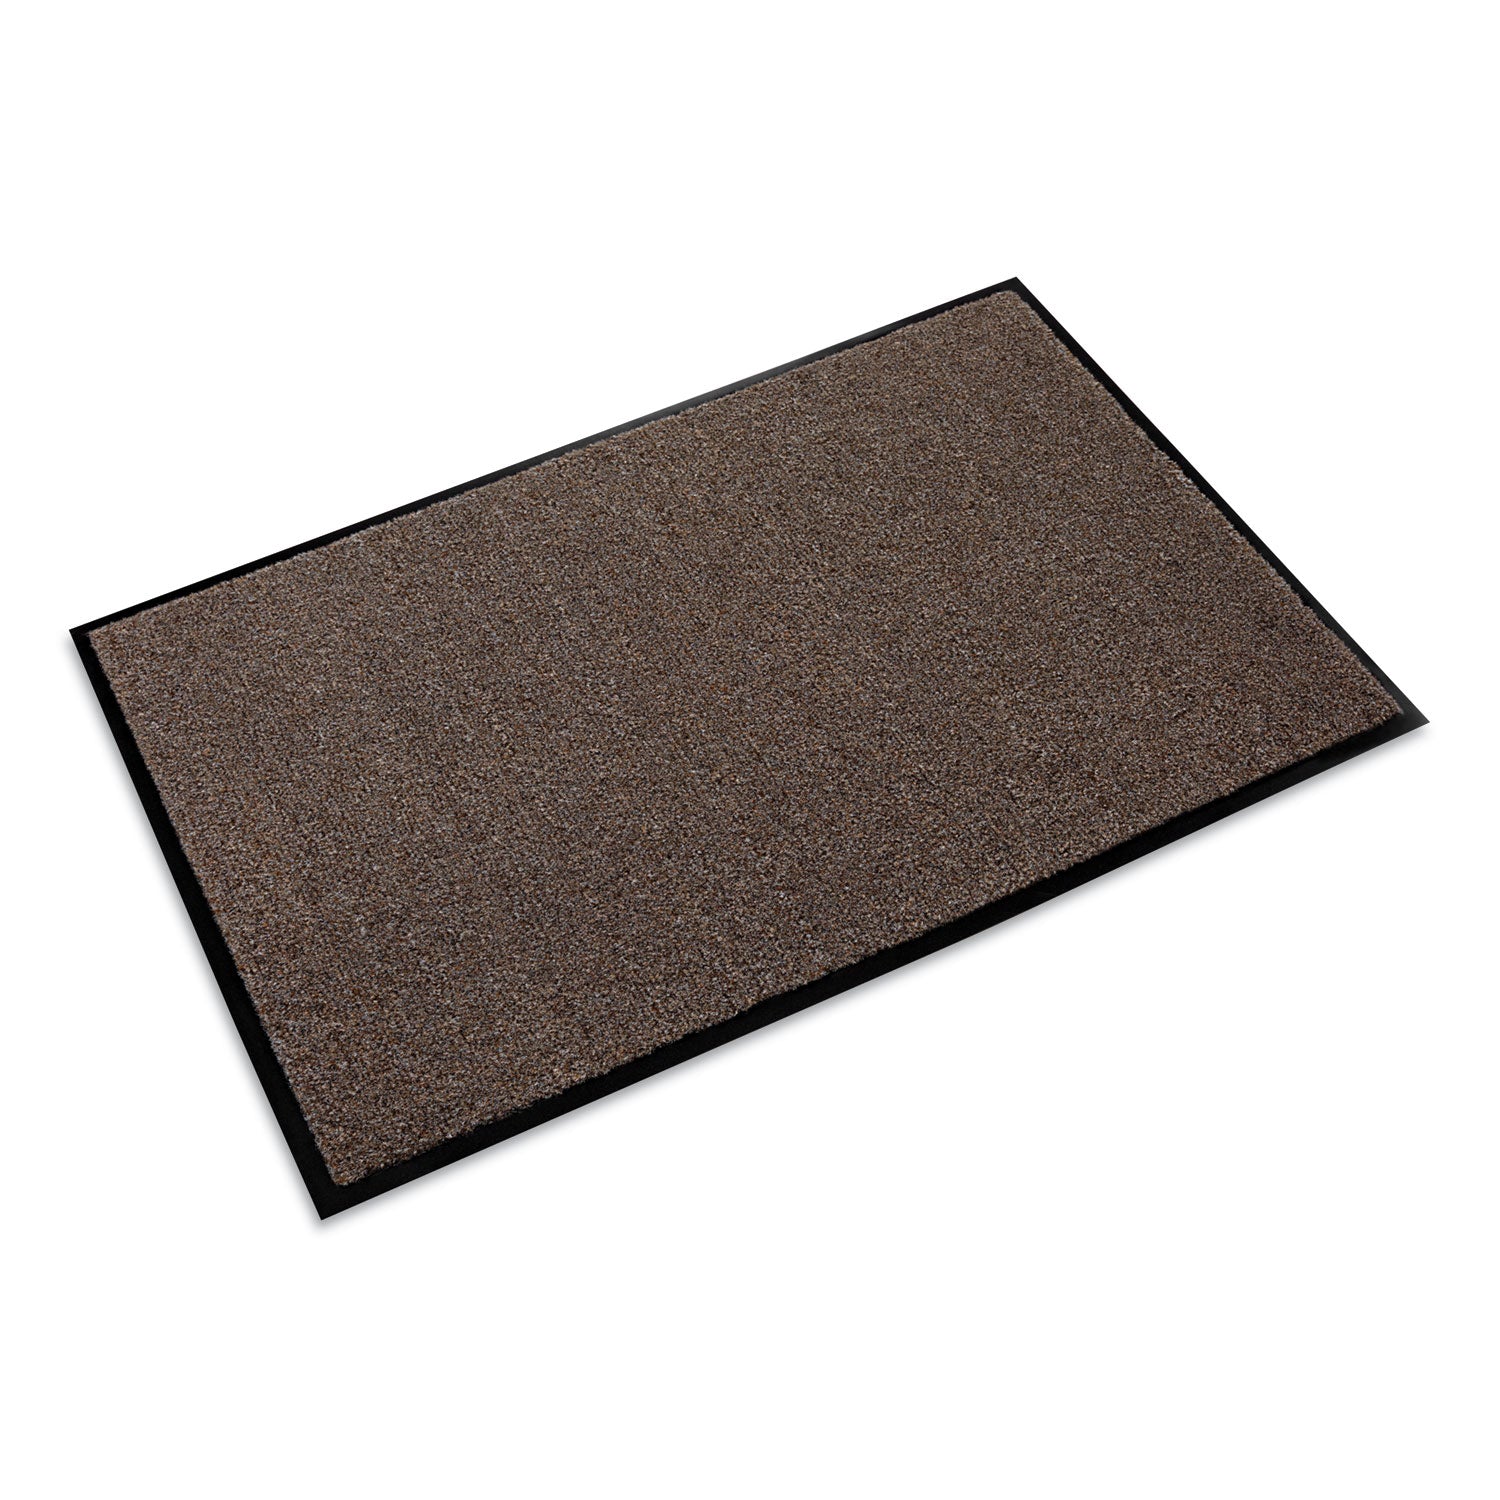 Rely-On Olefin Indoor Wiper Mat, 36 x 120, Charcoal - 1